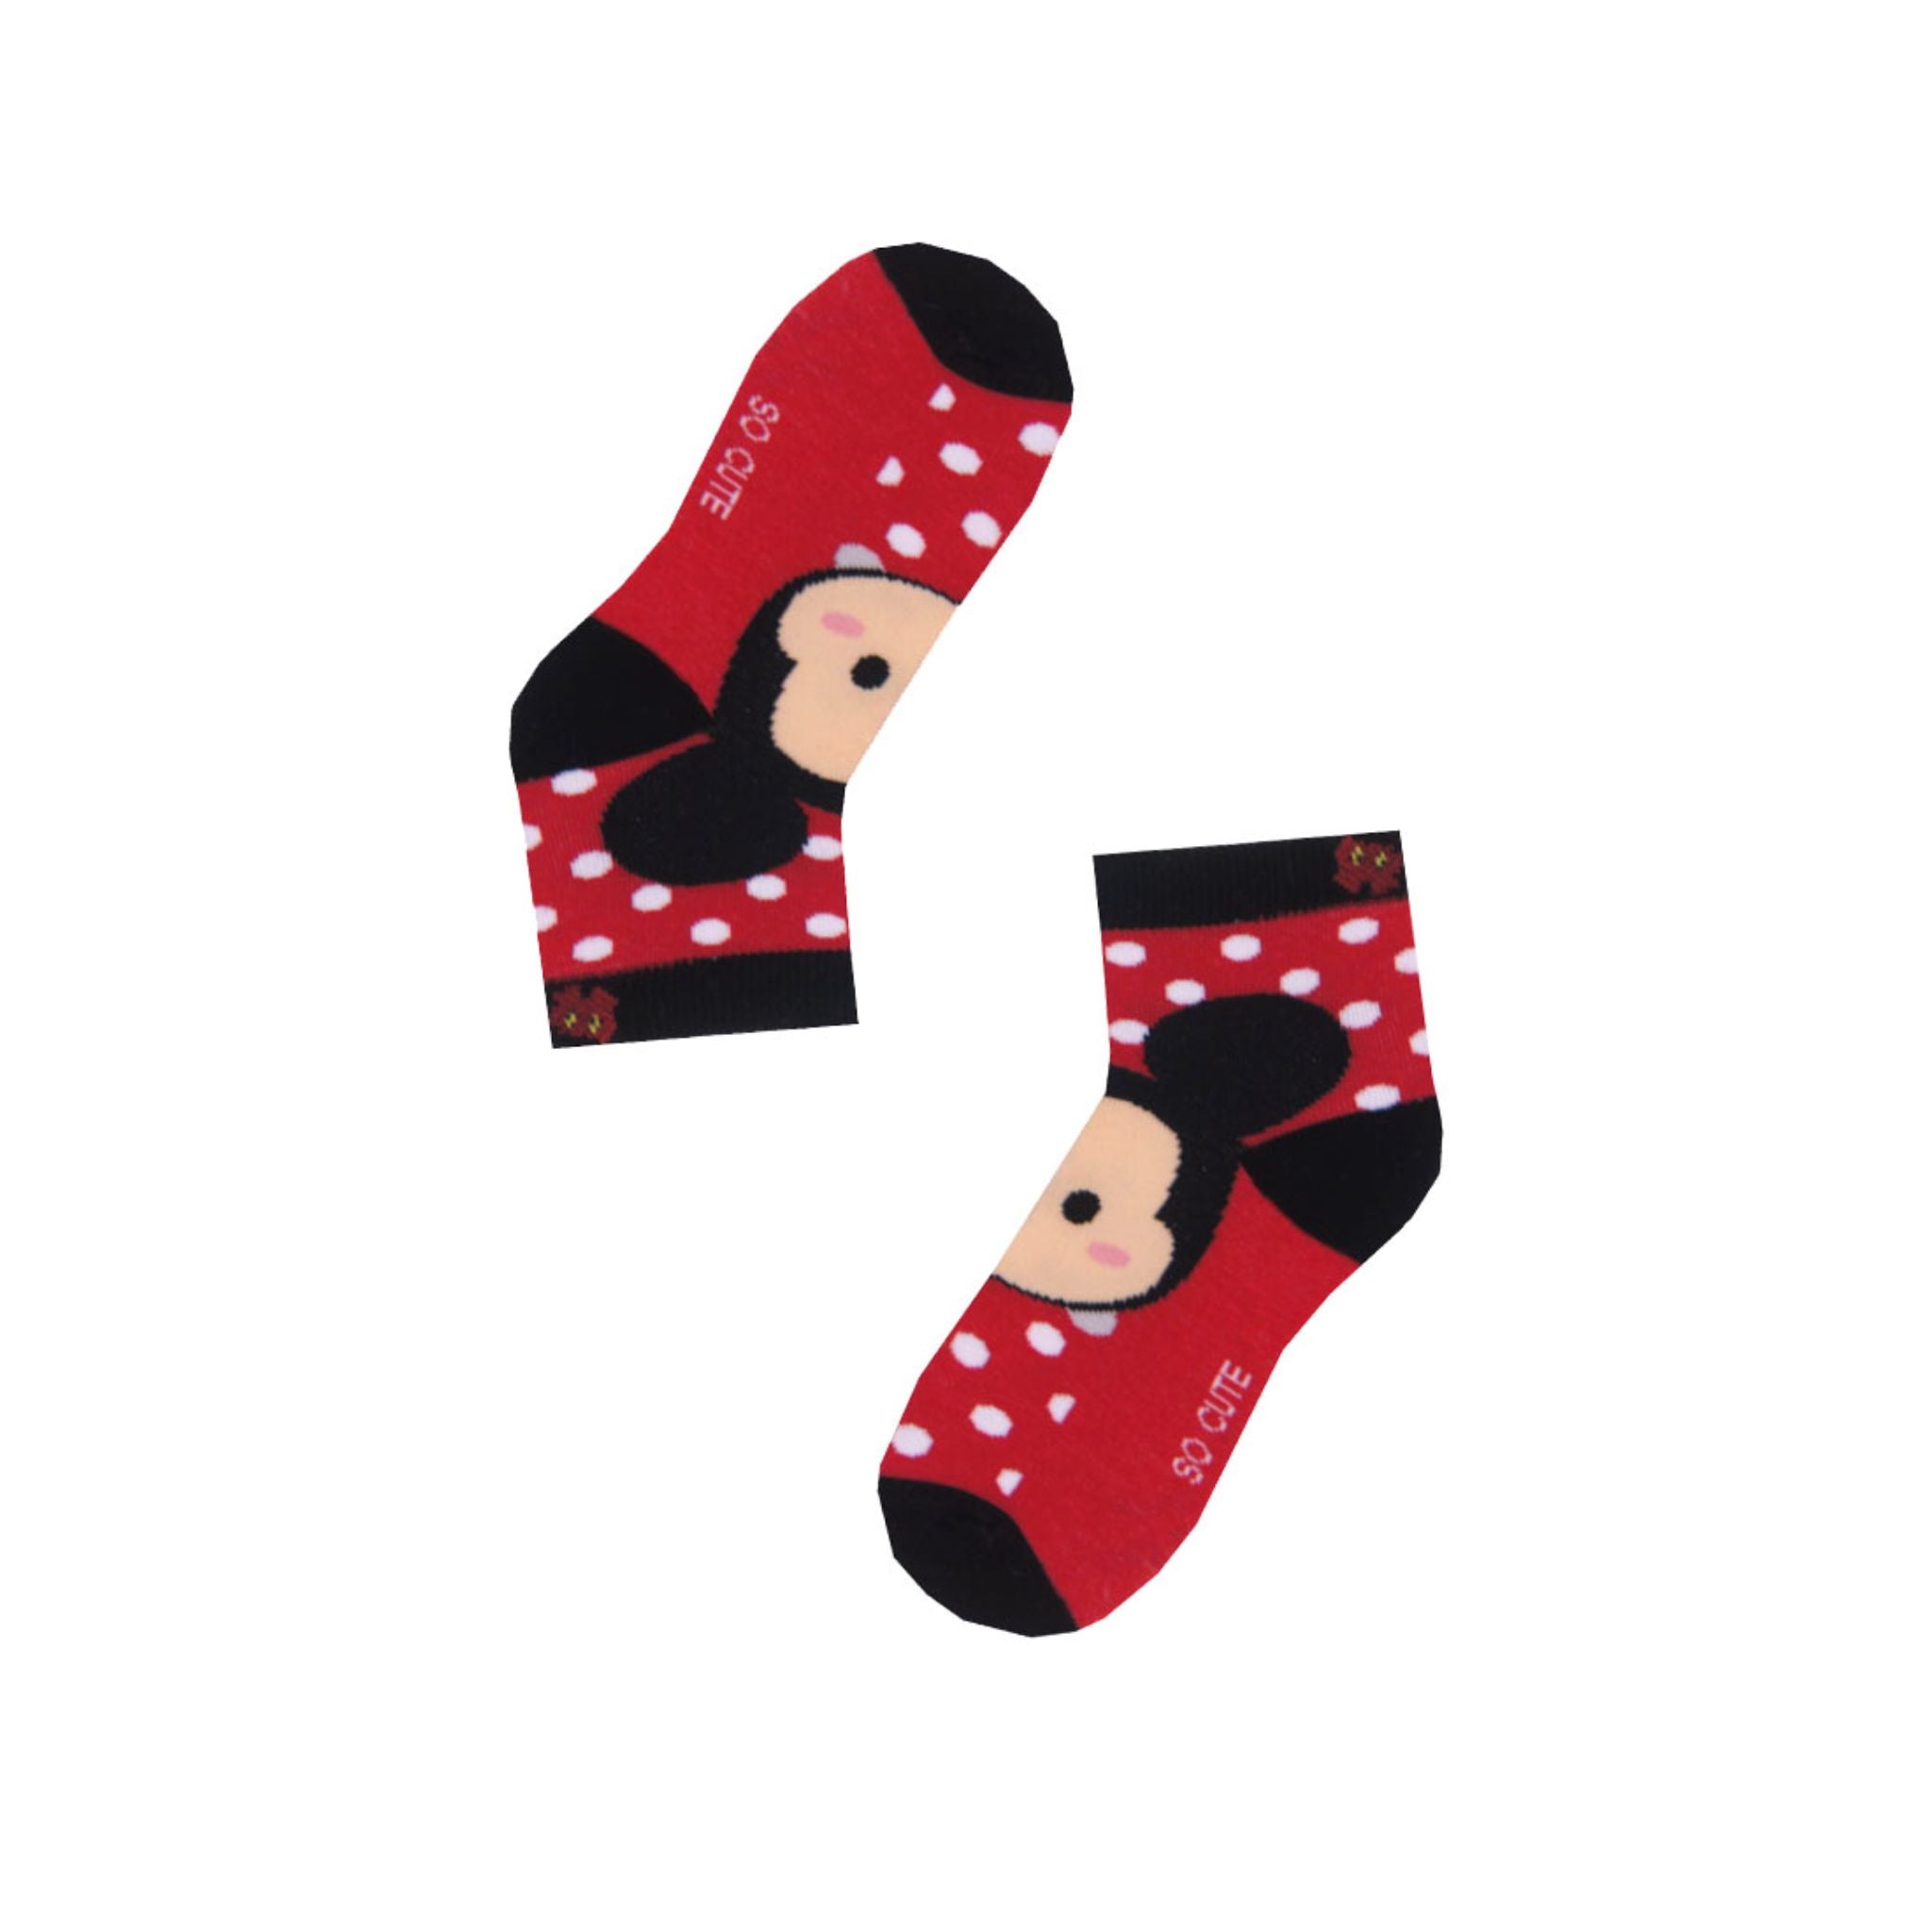 RAD RUSSEL Mickey Tsum Tsums Kids Socks - Ages 2 to 7 - Red